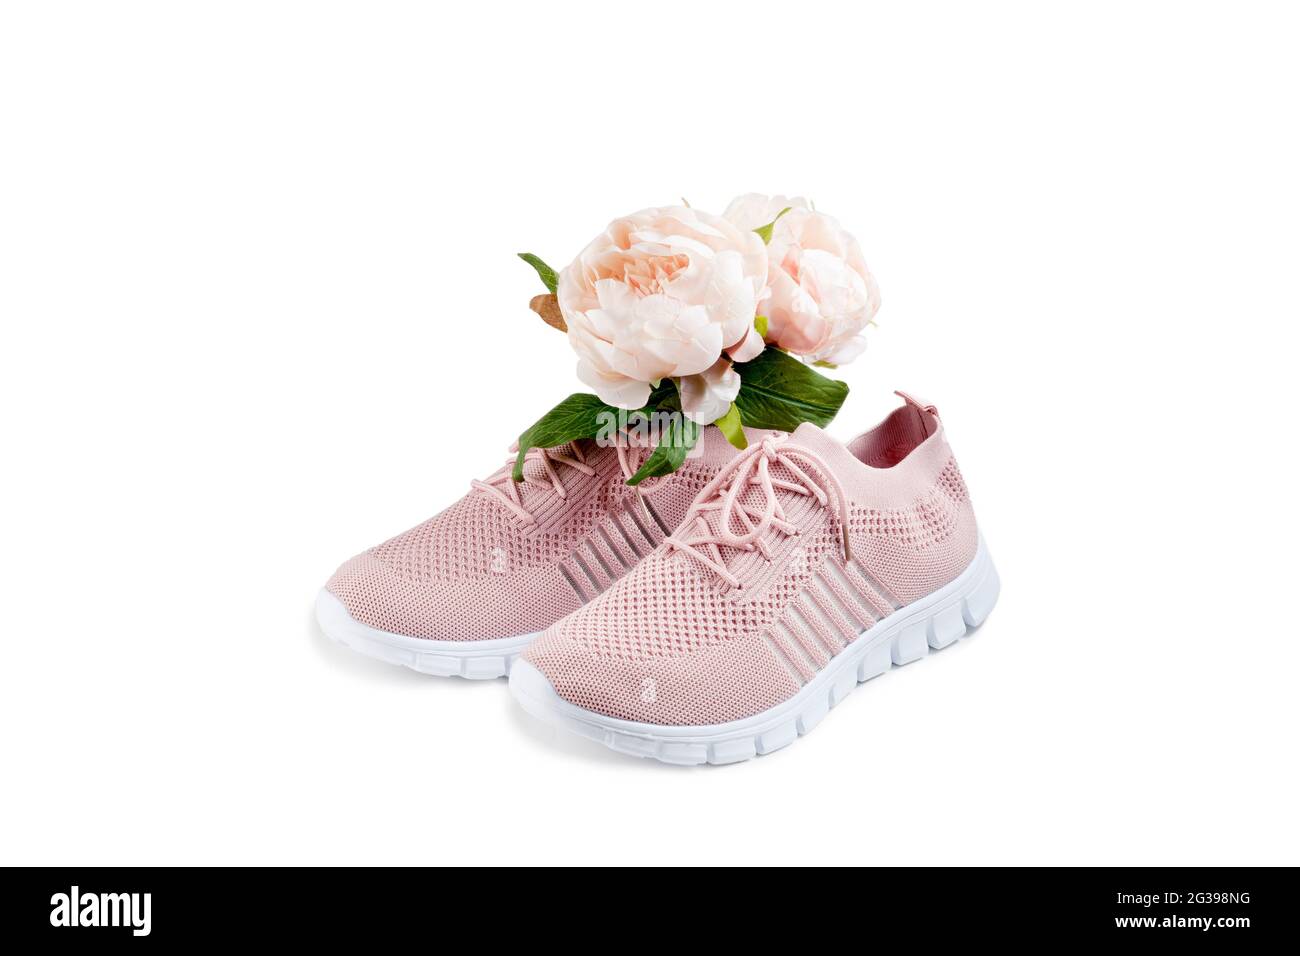 Pink women's shoes from a light soft fabric on a white background. There is a bouquet of flowers inside the shoe. Stock Photo